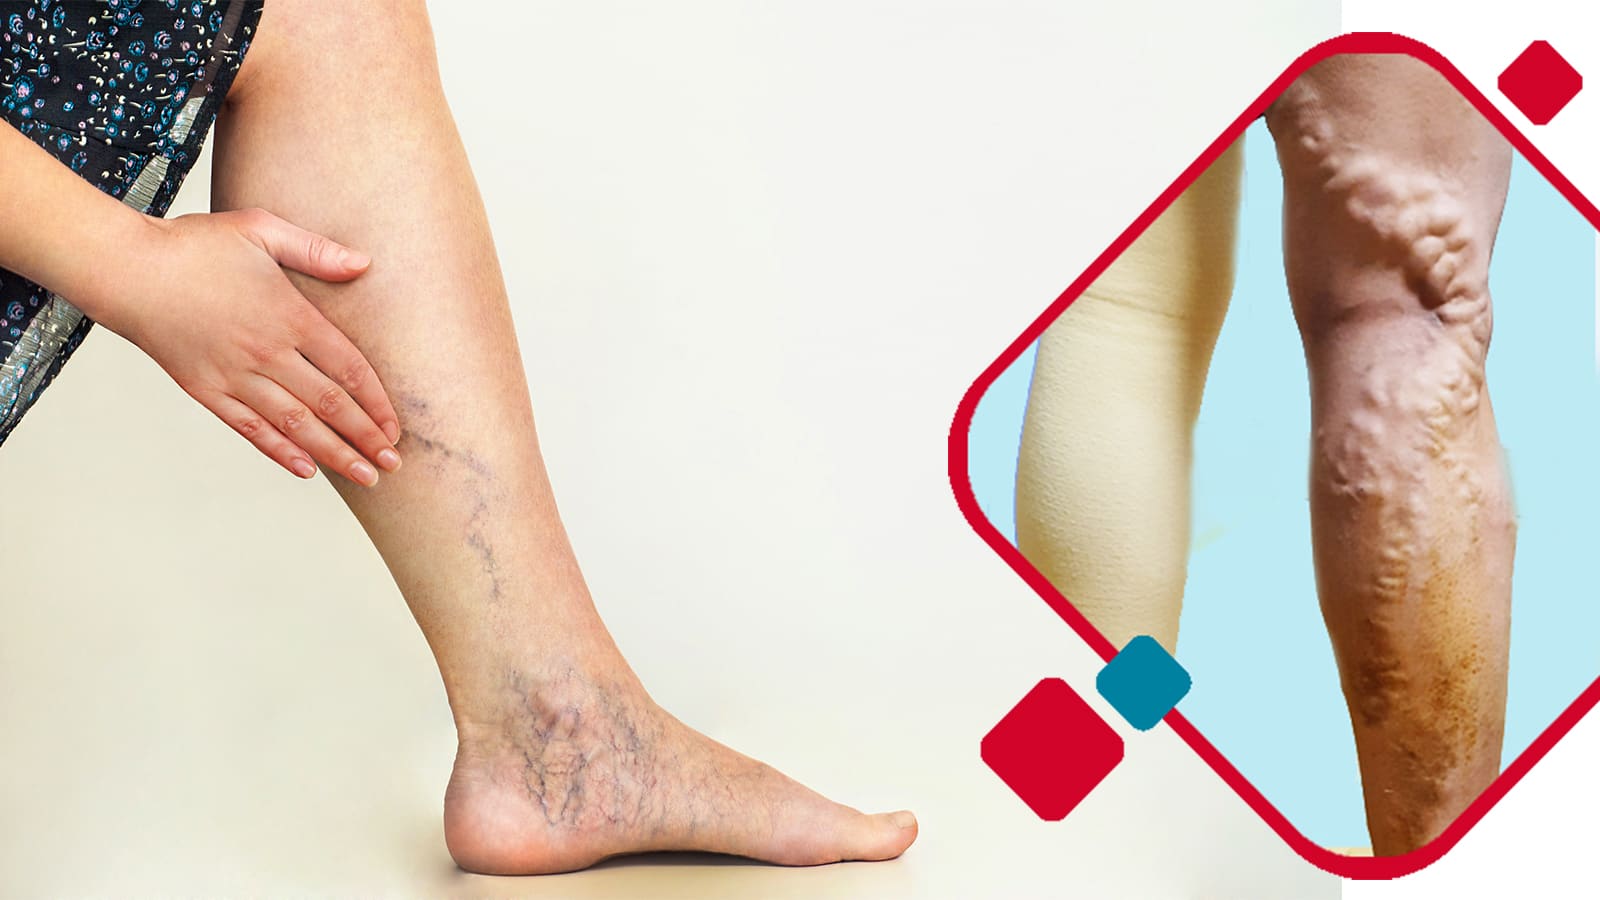 Five Ways to Completely Prevent Varicose Veins While Working